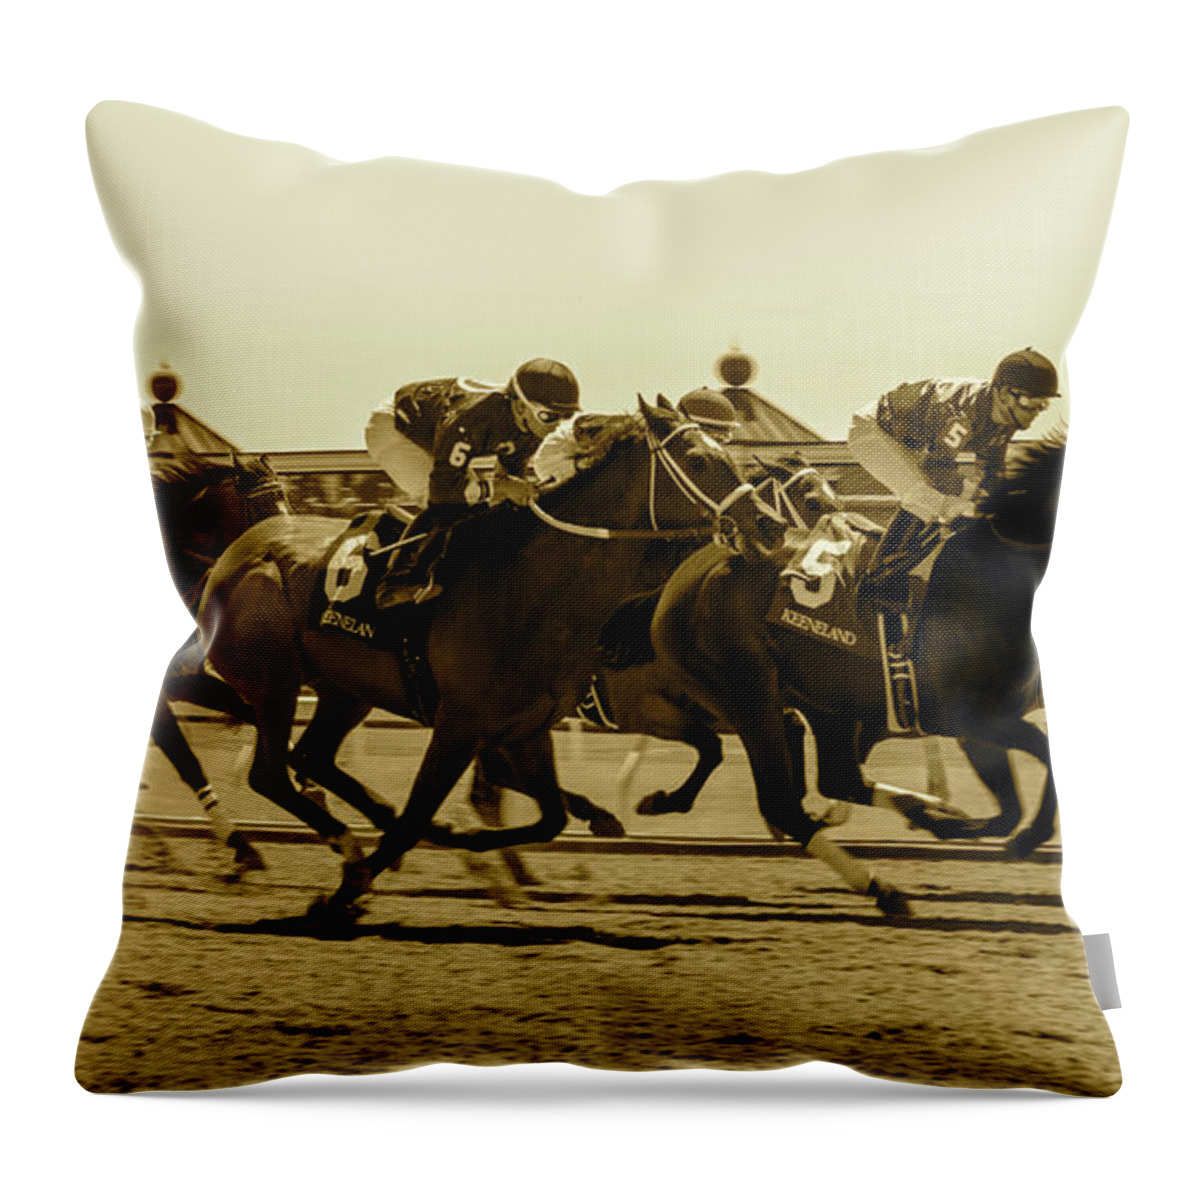  Throw Pillow featuring the photograph Keenland Sepia by Dan Hefle